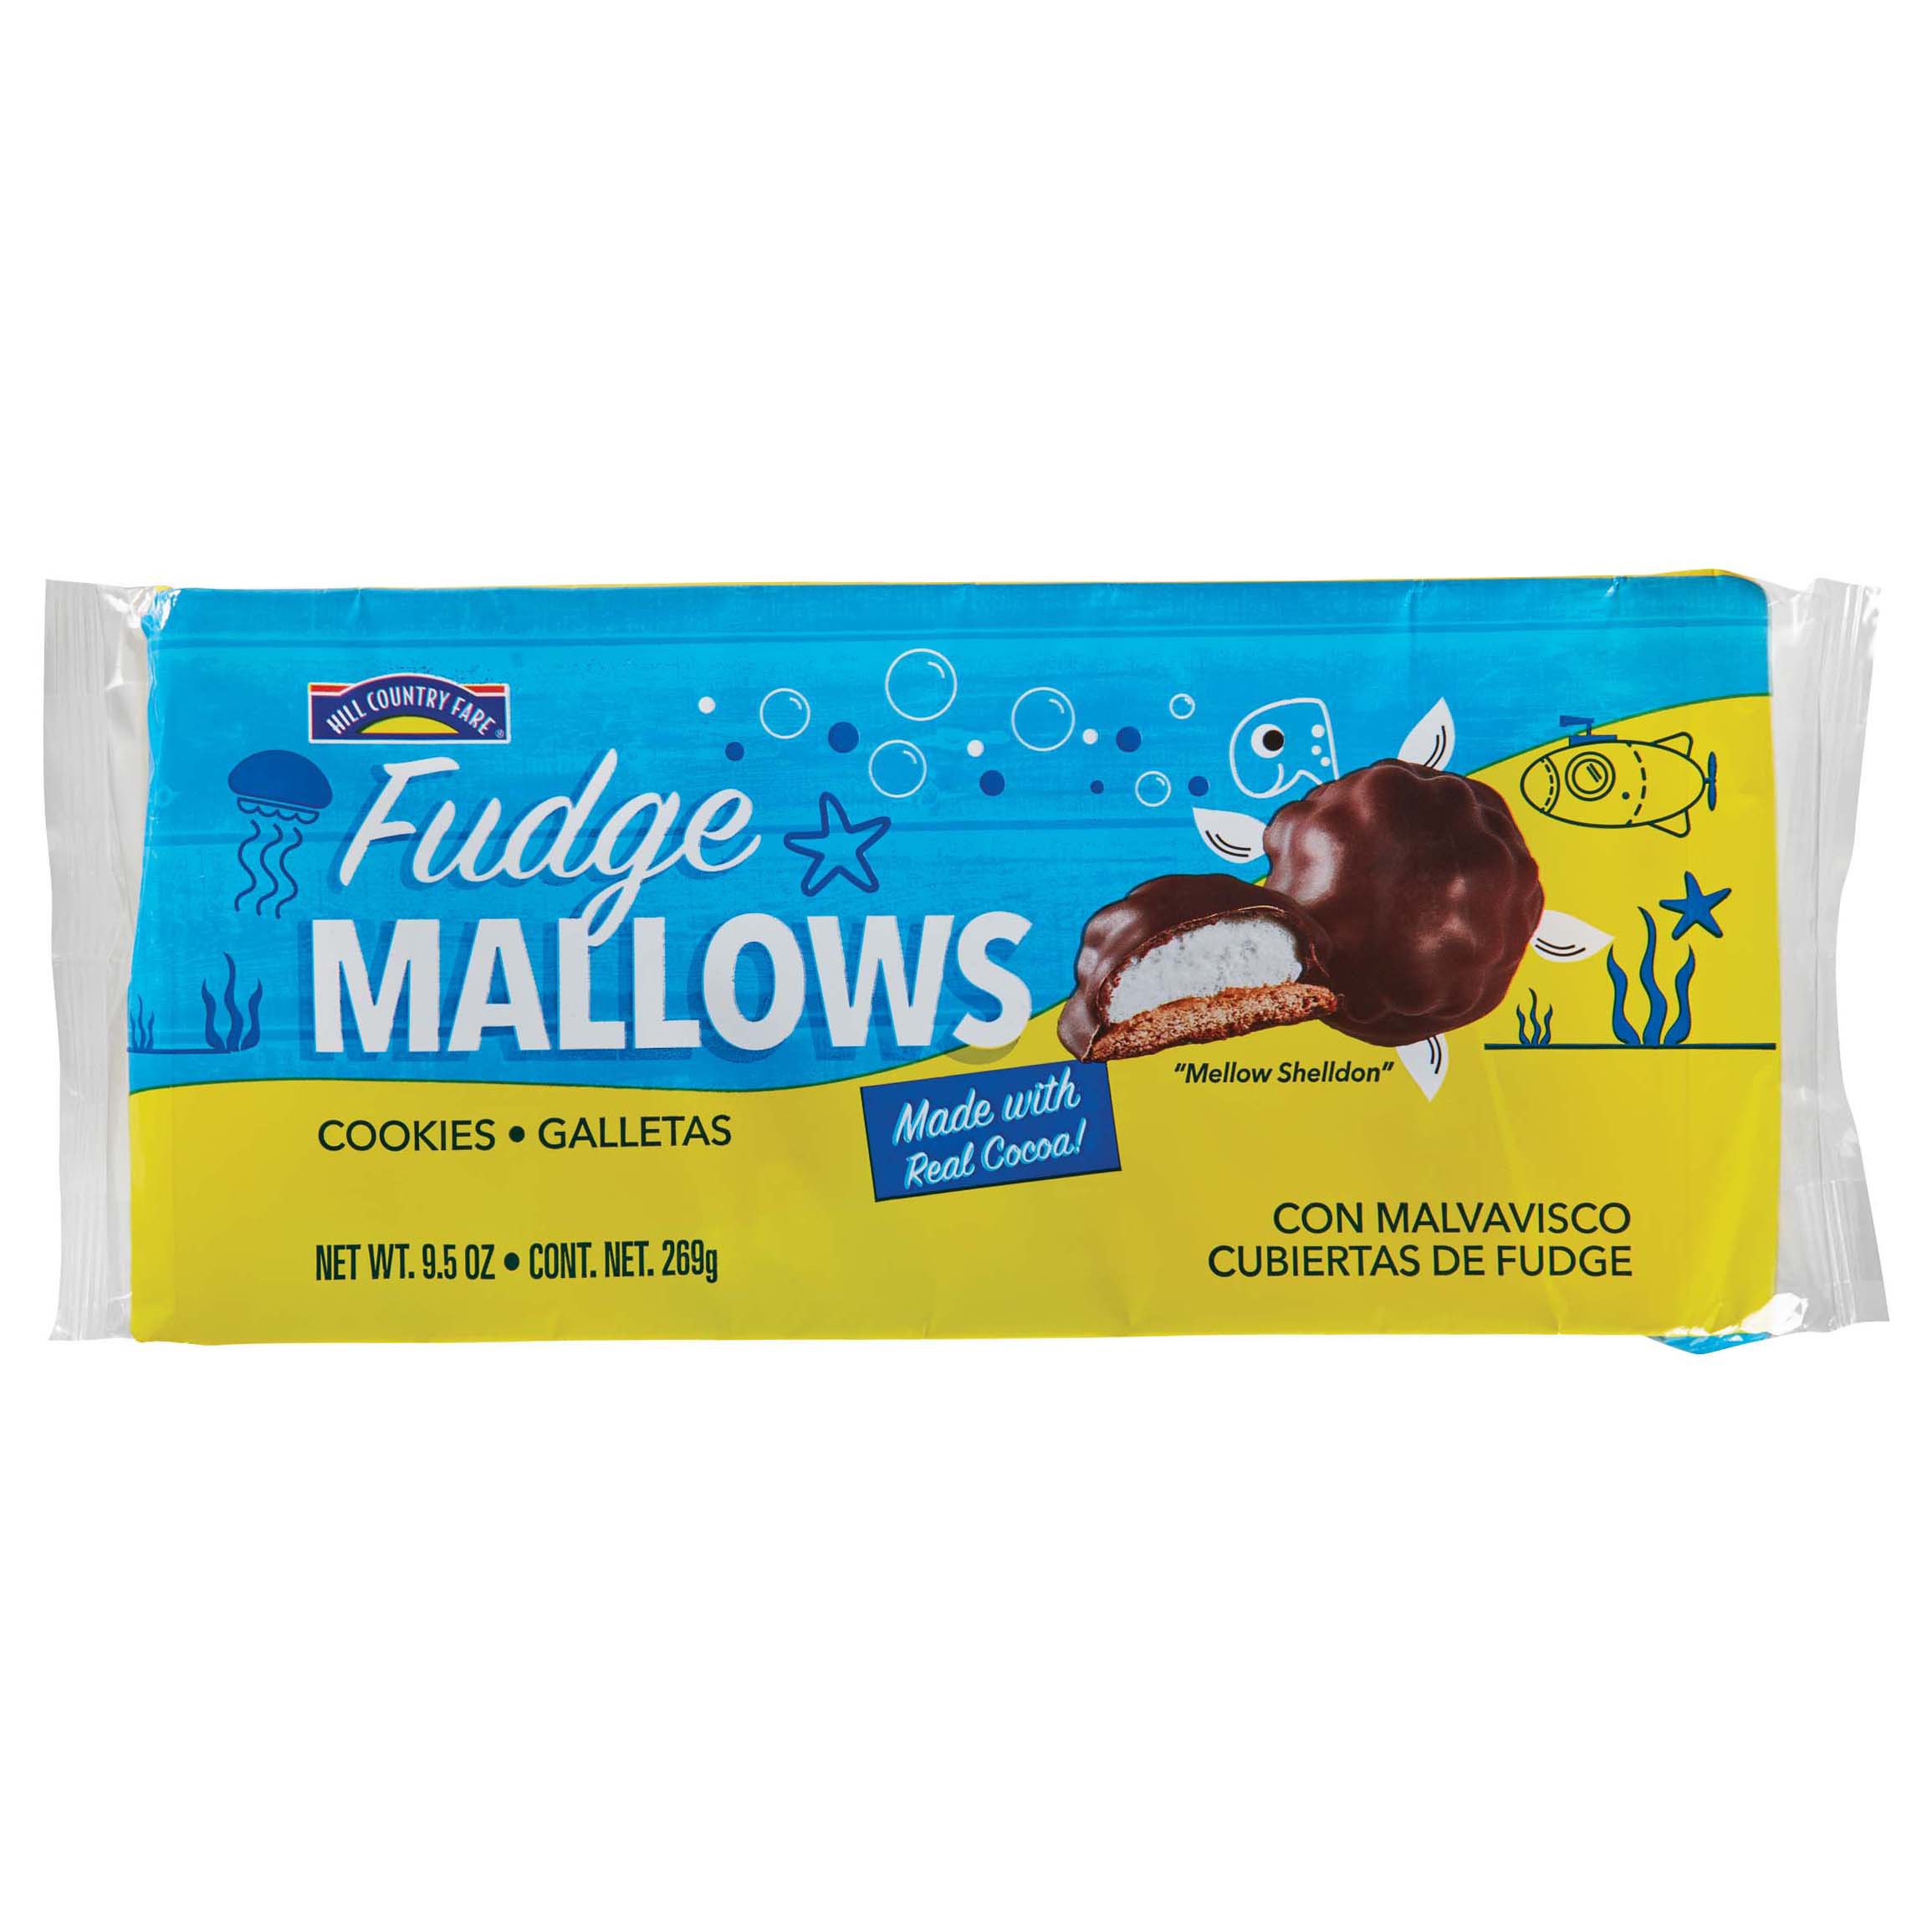 Hill Country Fare Fudge Mallows Cookies - Shop Cookies at H-E-B